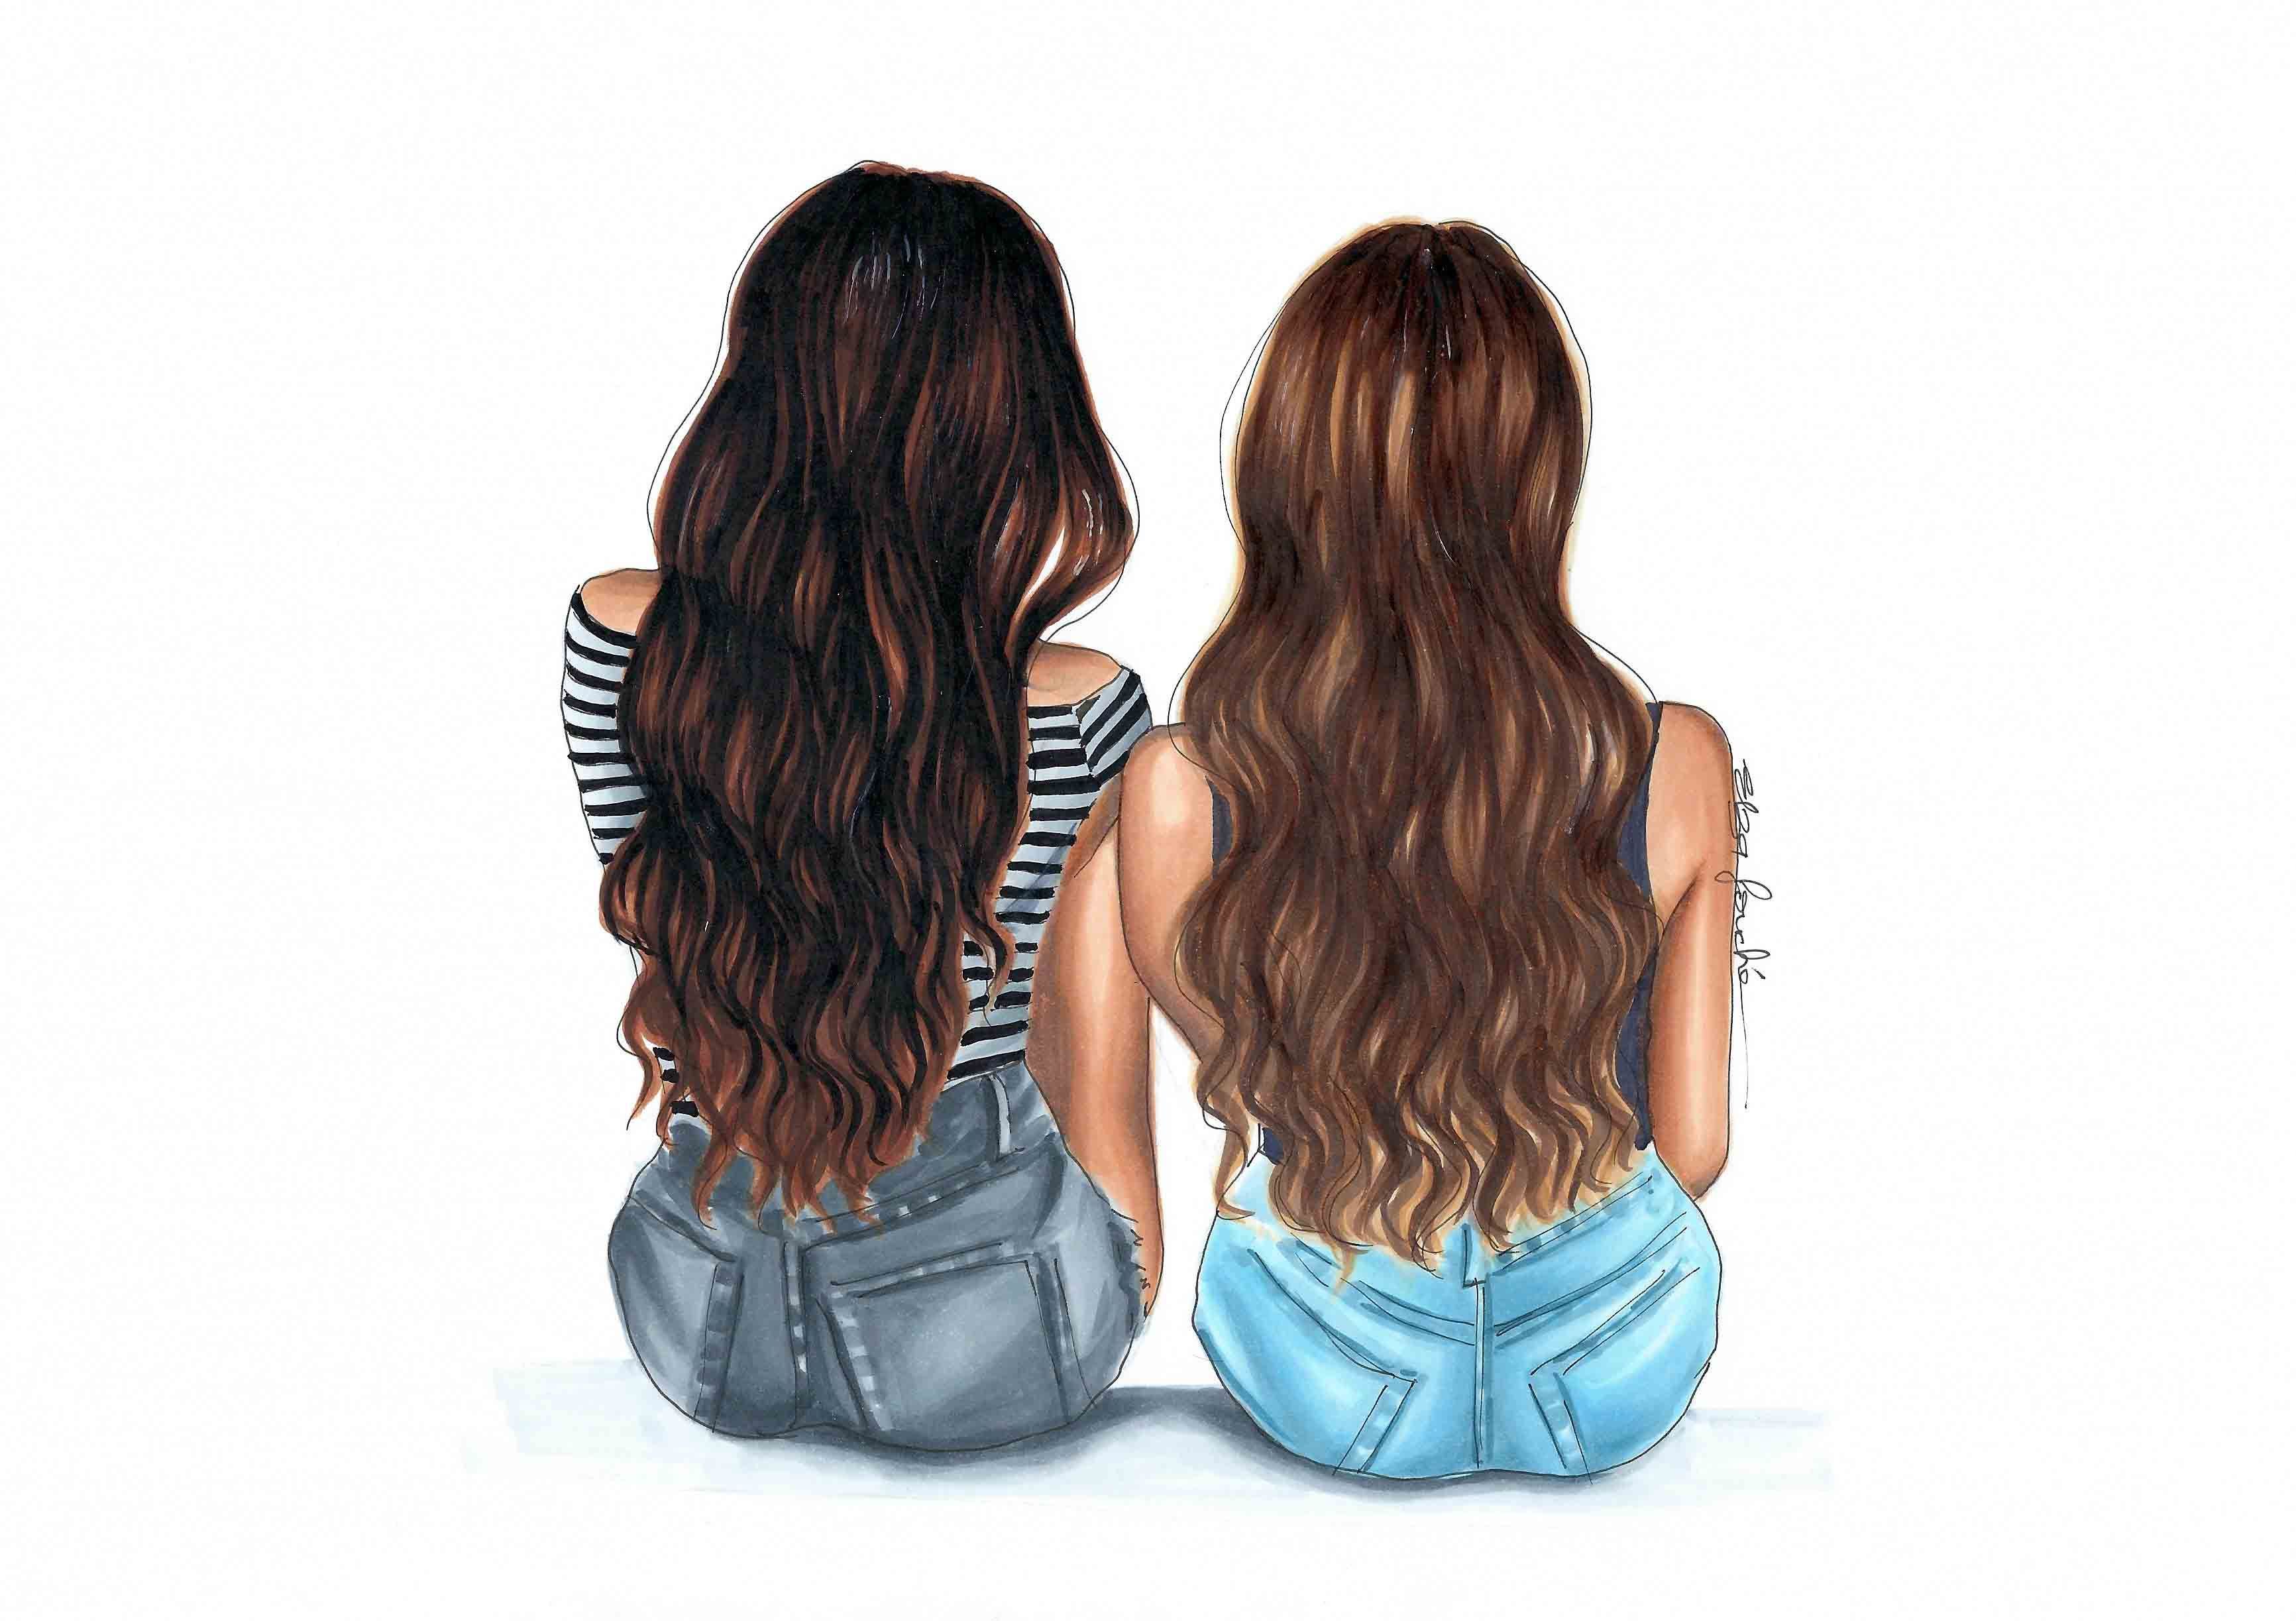 elzafoucheartist #cutedrawing #cute #drawing #friendship. Cute best friend drawings, Best friend drawings, Drawings of friends